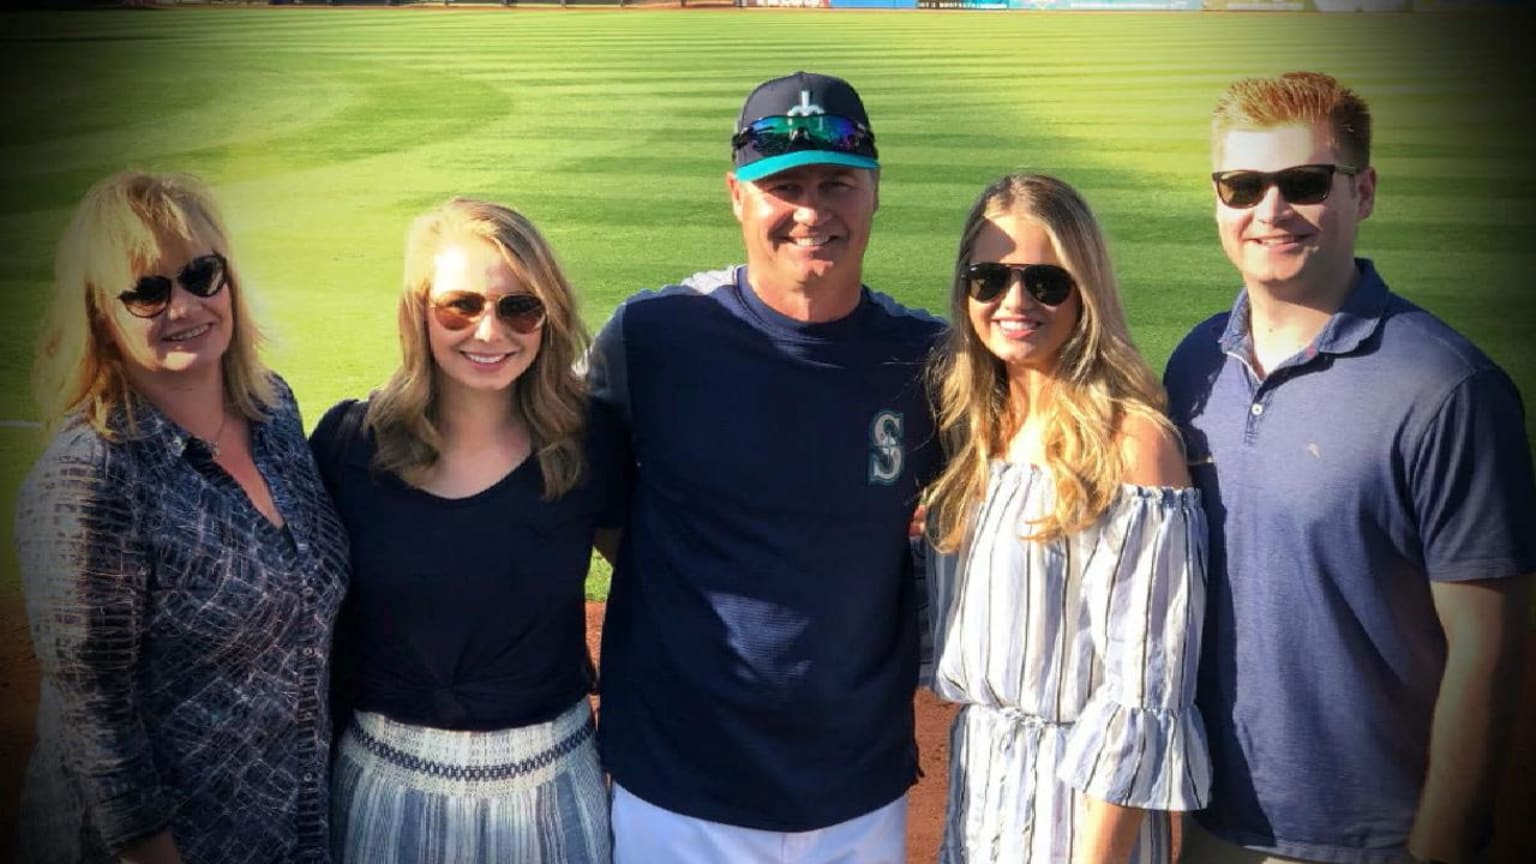 Servais' child on Father's Day, 06/17/2018